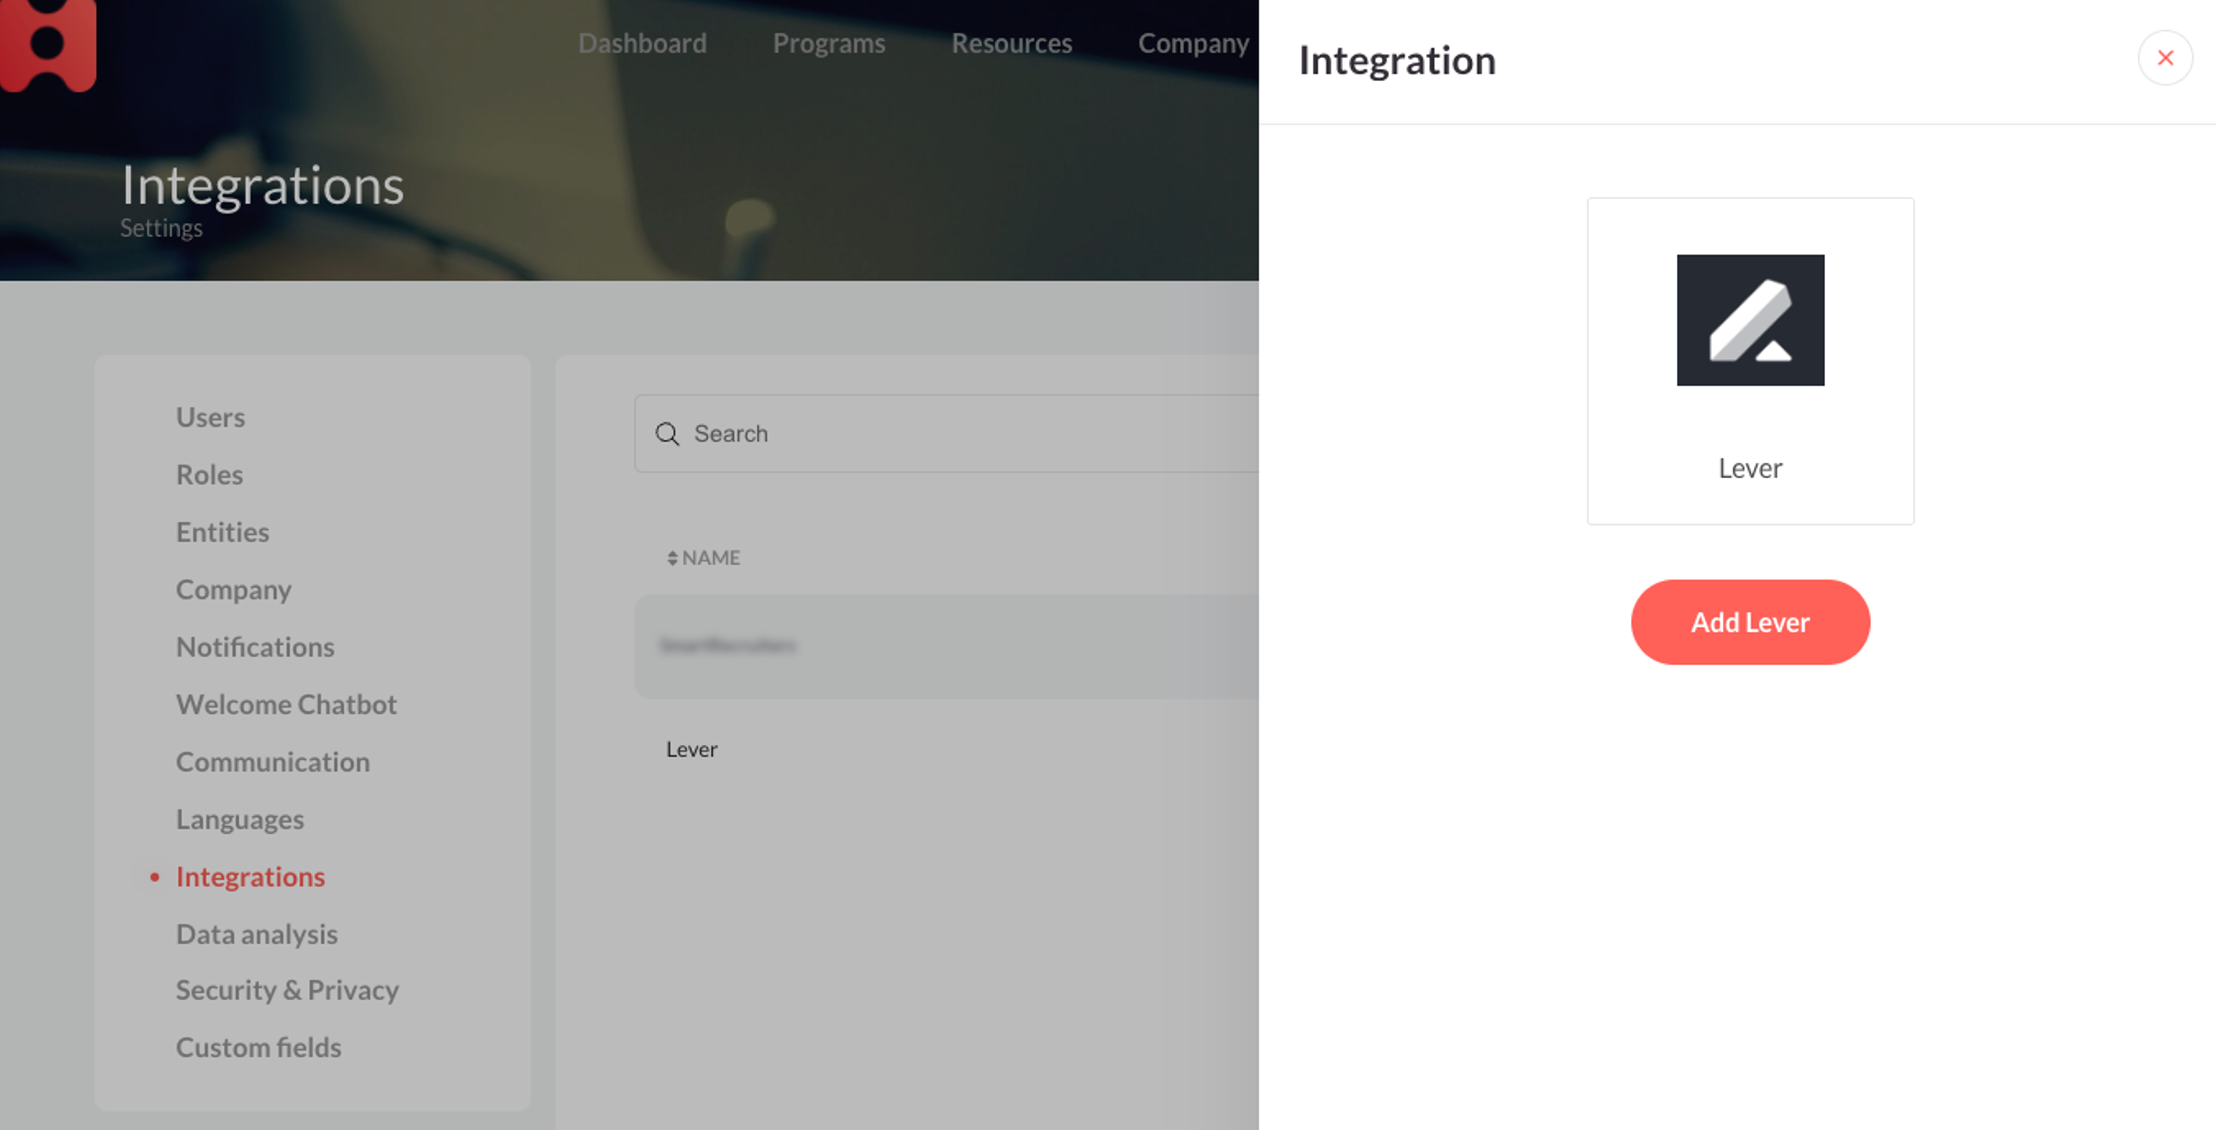 HeyTeam platform integrations page showing lever listing and add lever button